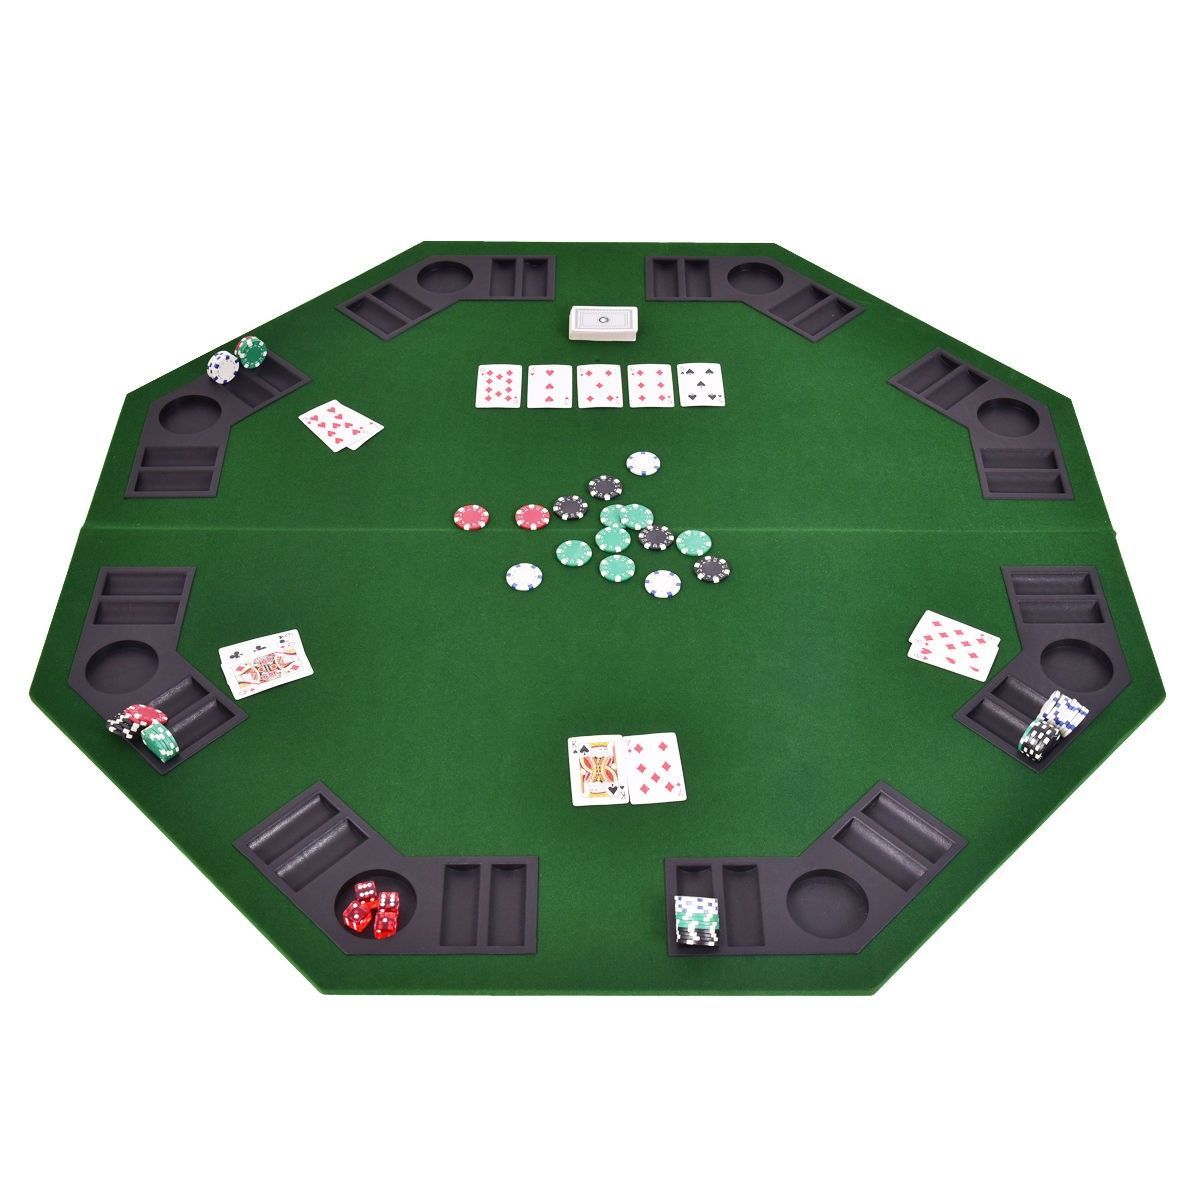 48" 8 Players Octagon Foldable Poker Table Top | Poker Regarding 2018 Mcbride 48" 4 – Player Poker Tables (View 8 of 15)